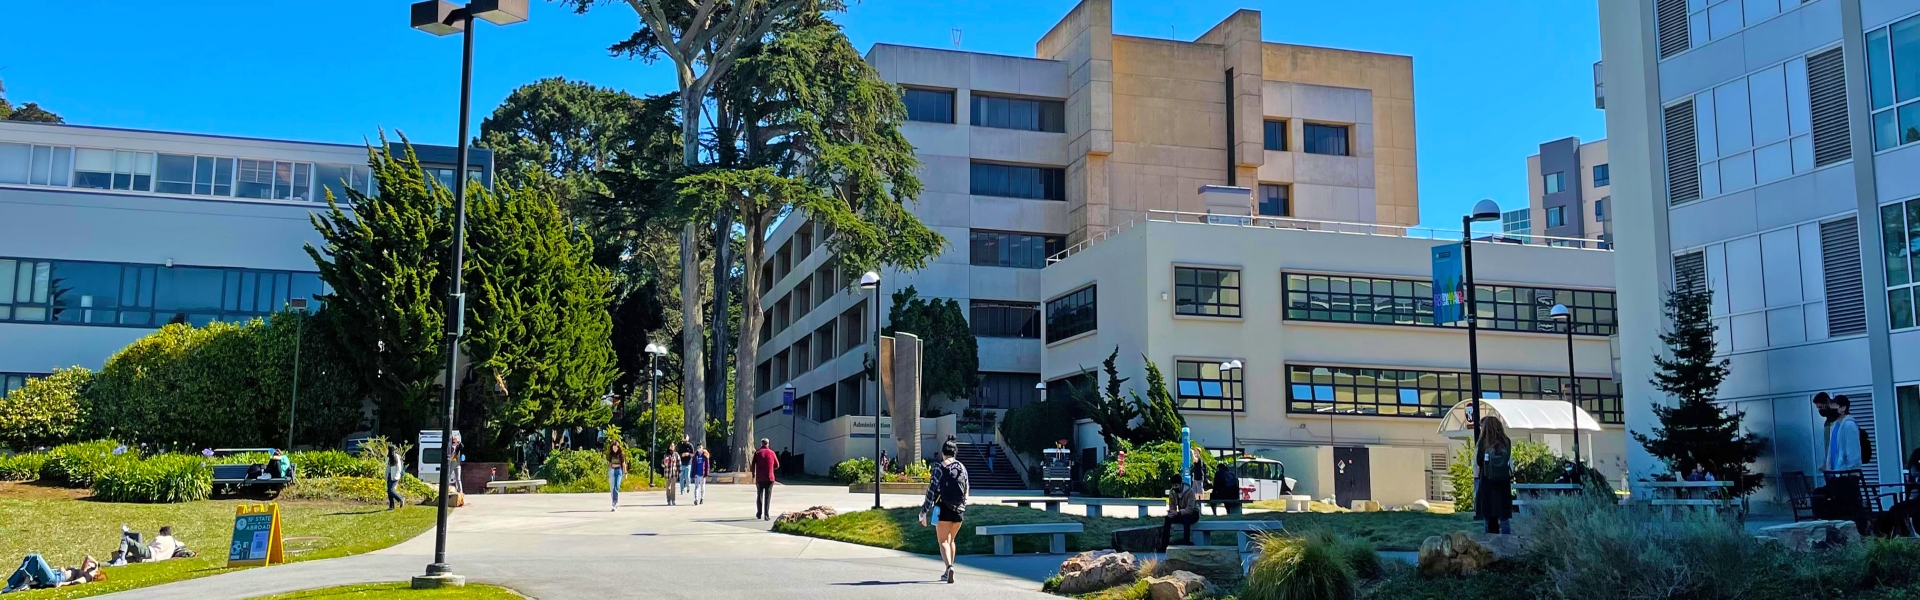 The walking path to administration building